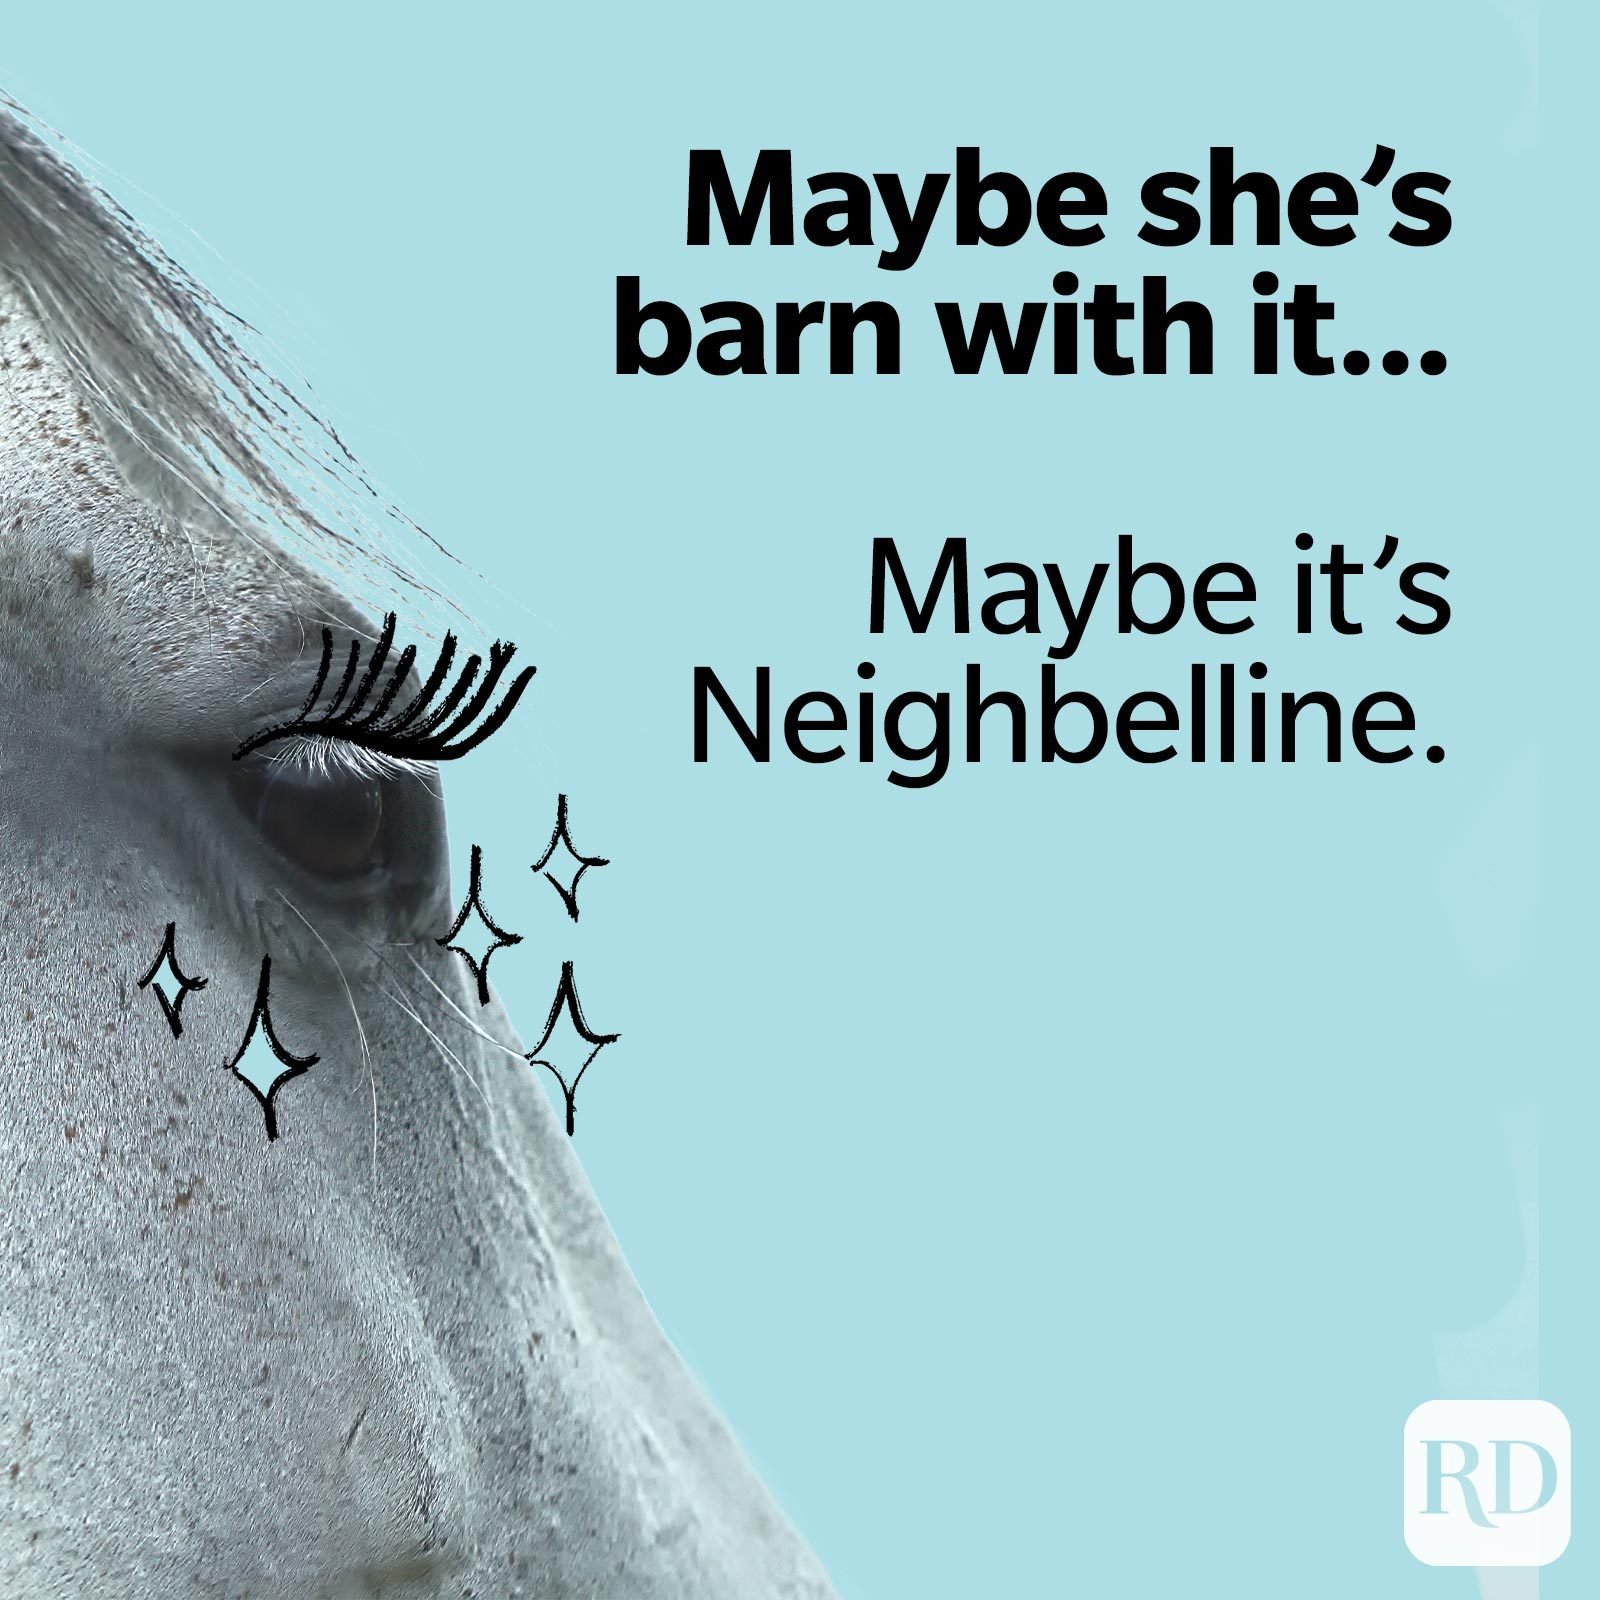 3. Maybe she’s barn with it… Maybe it’s neighbelline.